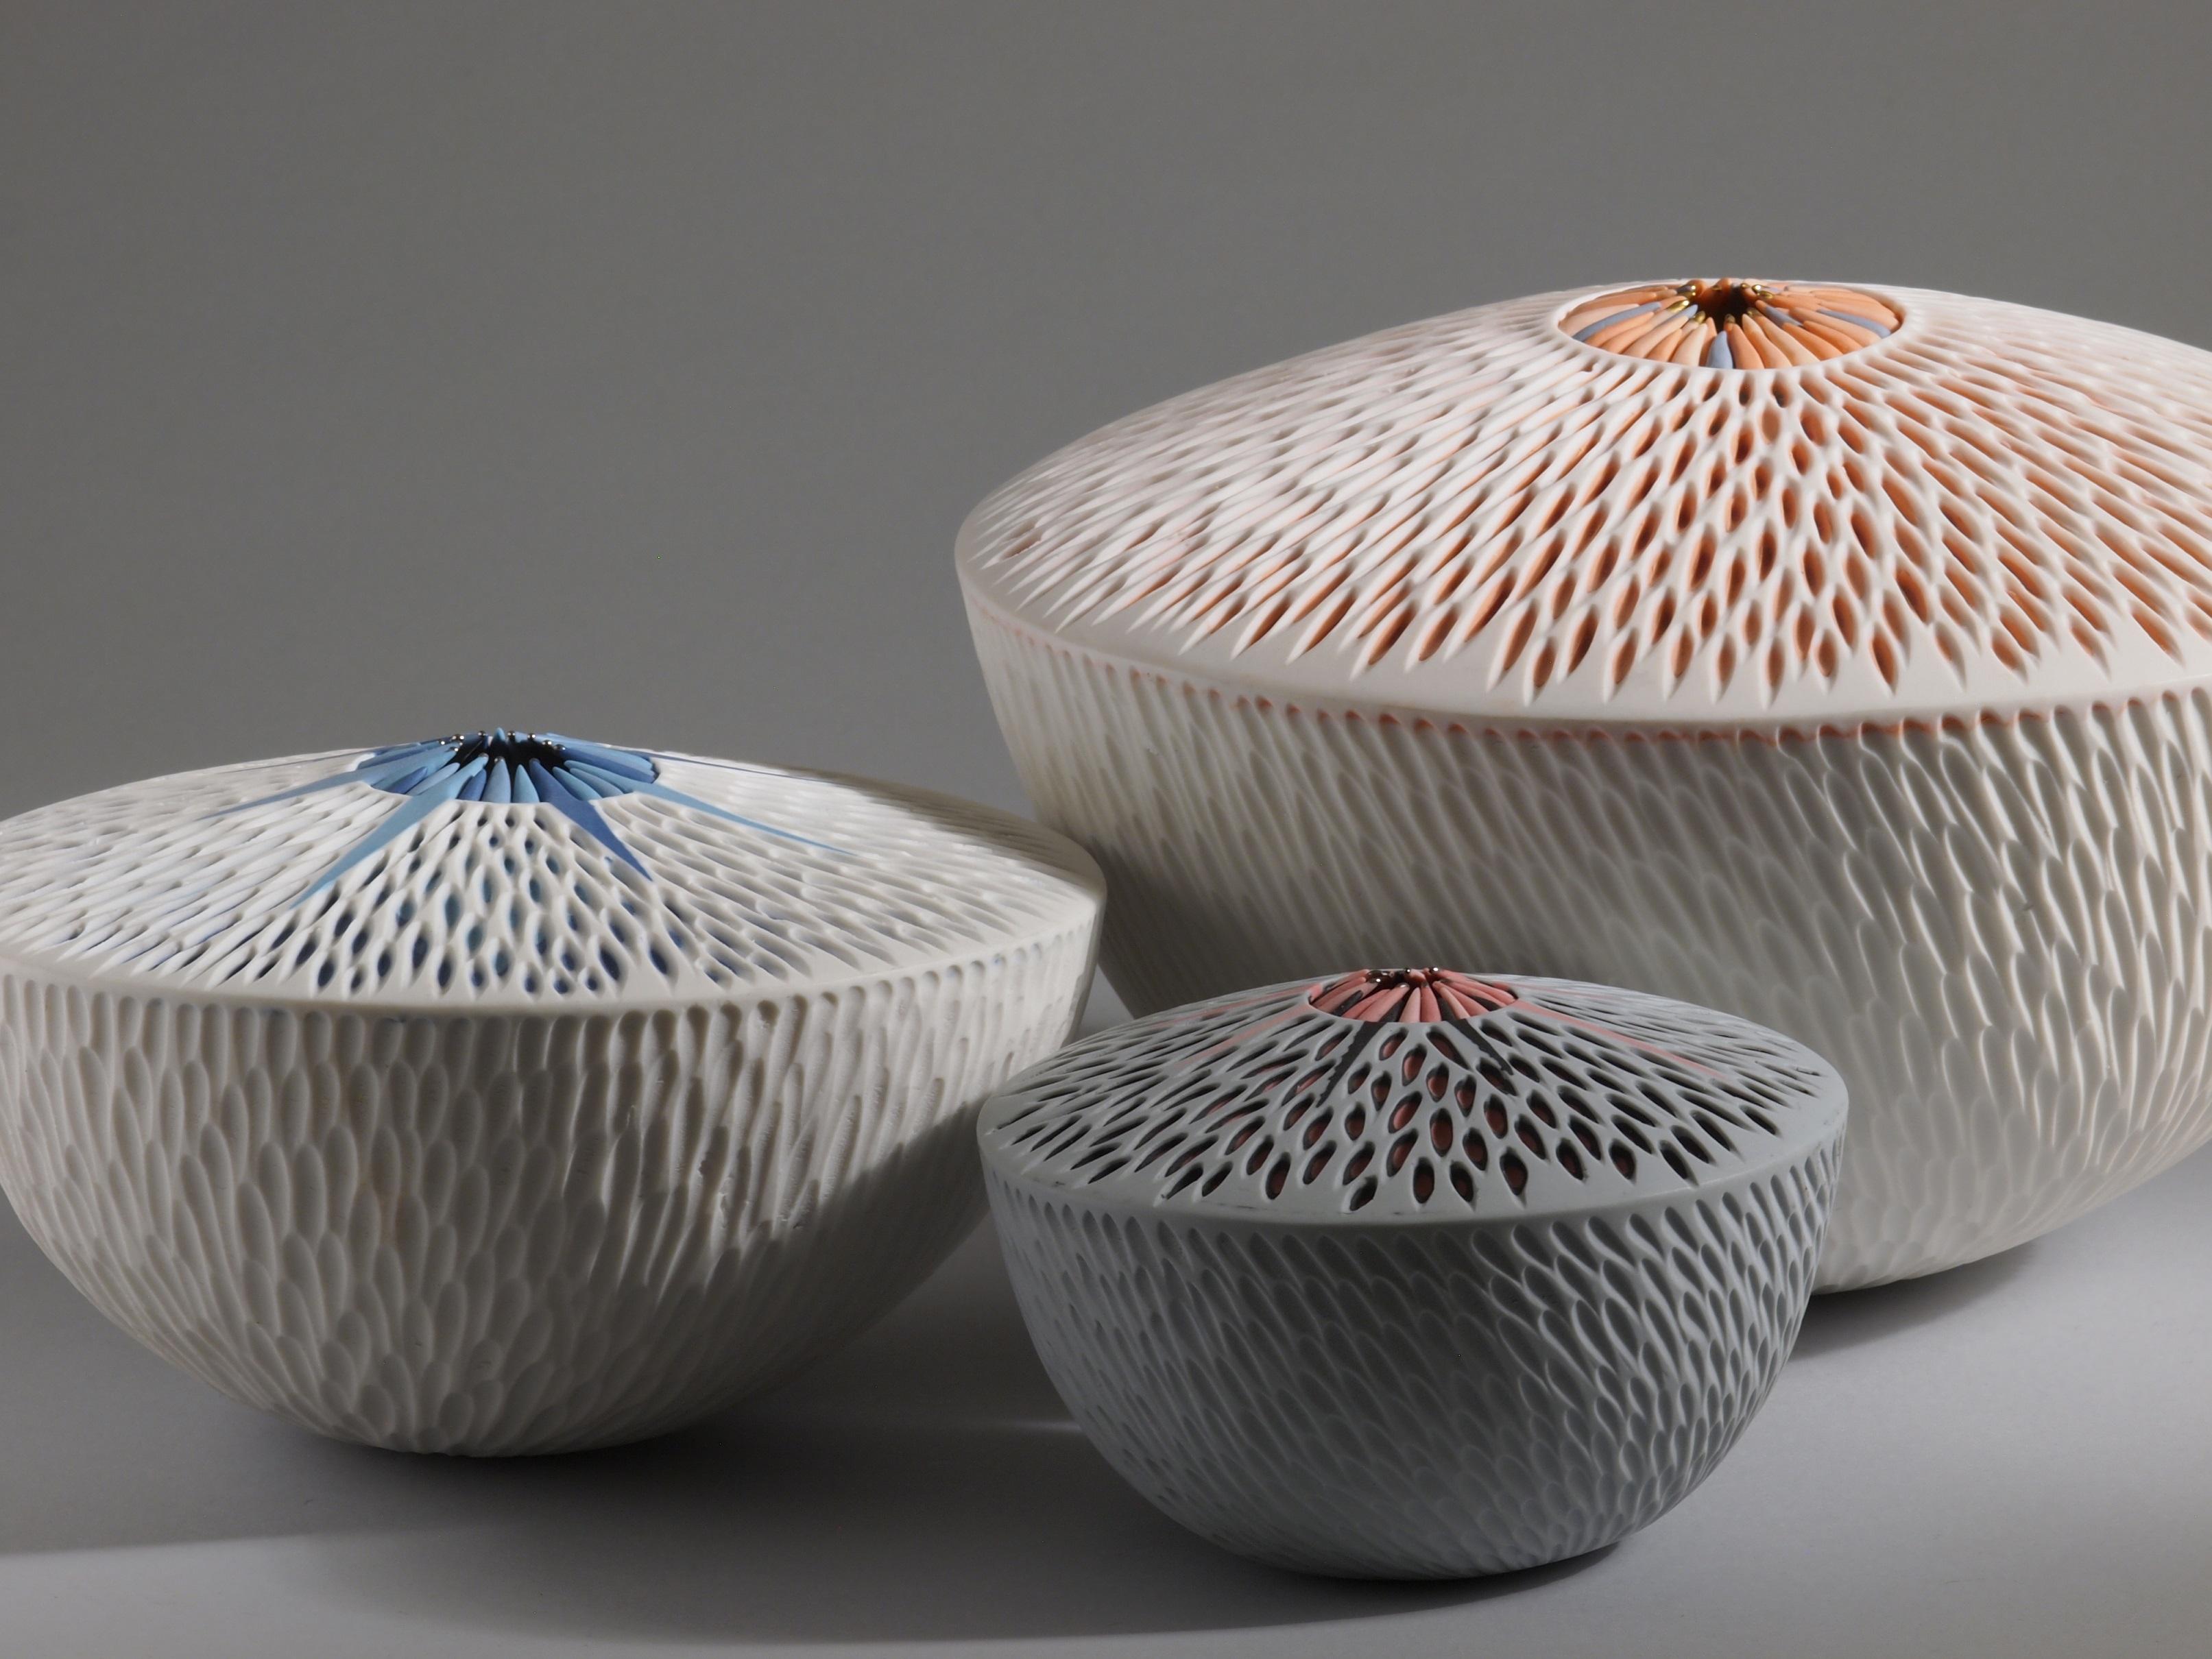 Martha Pachon Rodriguez, group of 3 starfish bowls, 2019, porcelain. Unique pieces, entirely handmade.

Measures: Large bowl: 26cm diameter x 18cm height
Medium bowl: 20cm diameter x 12cm height
Small bowl: 14cm diameter x 10cm height

These